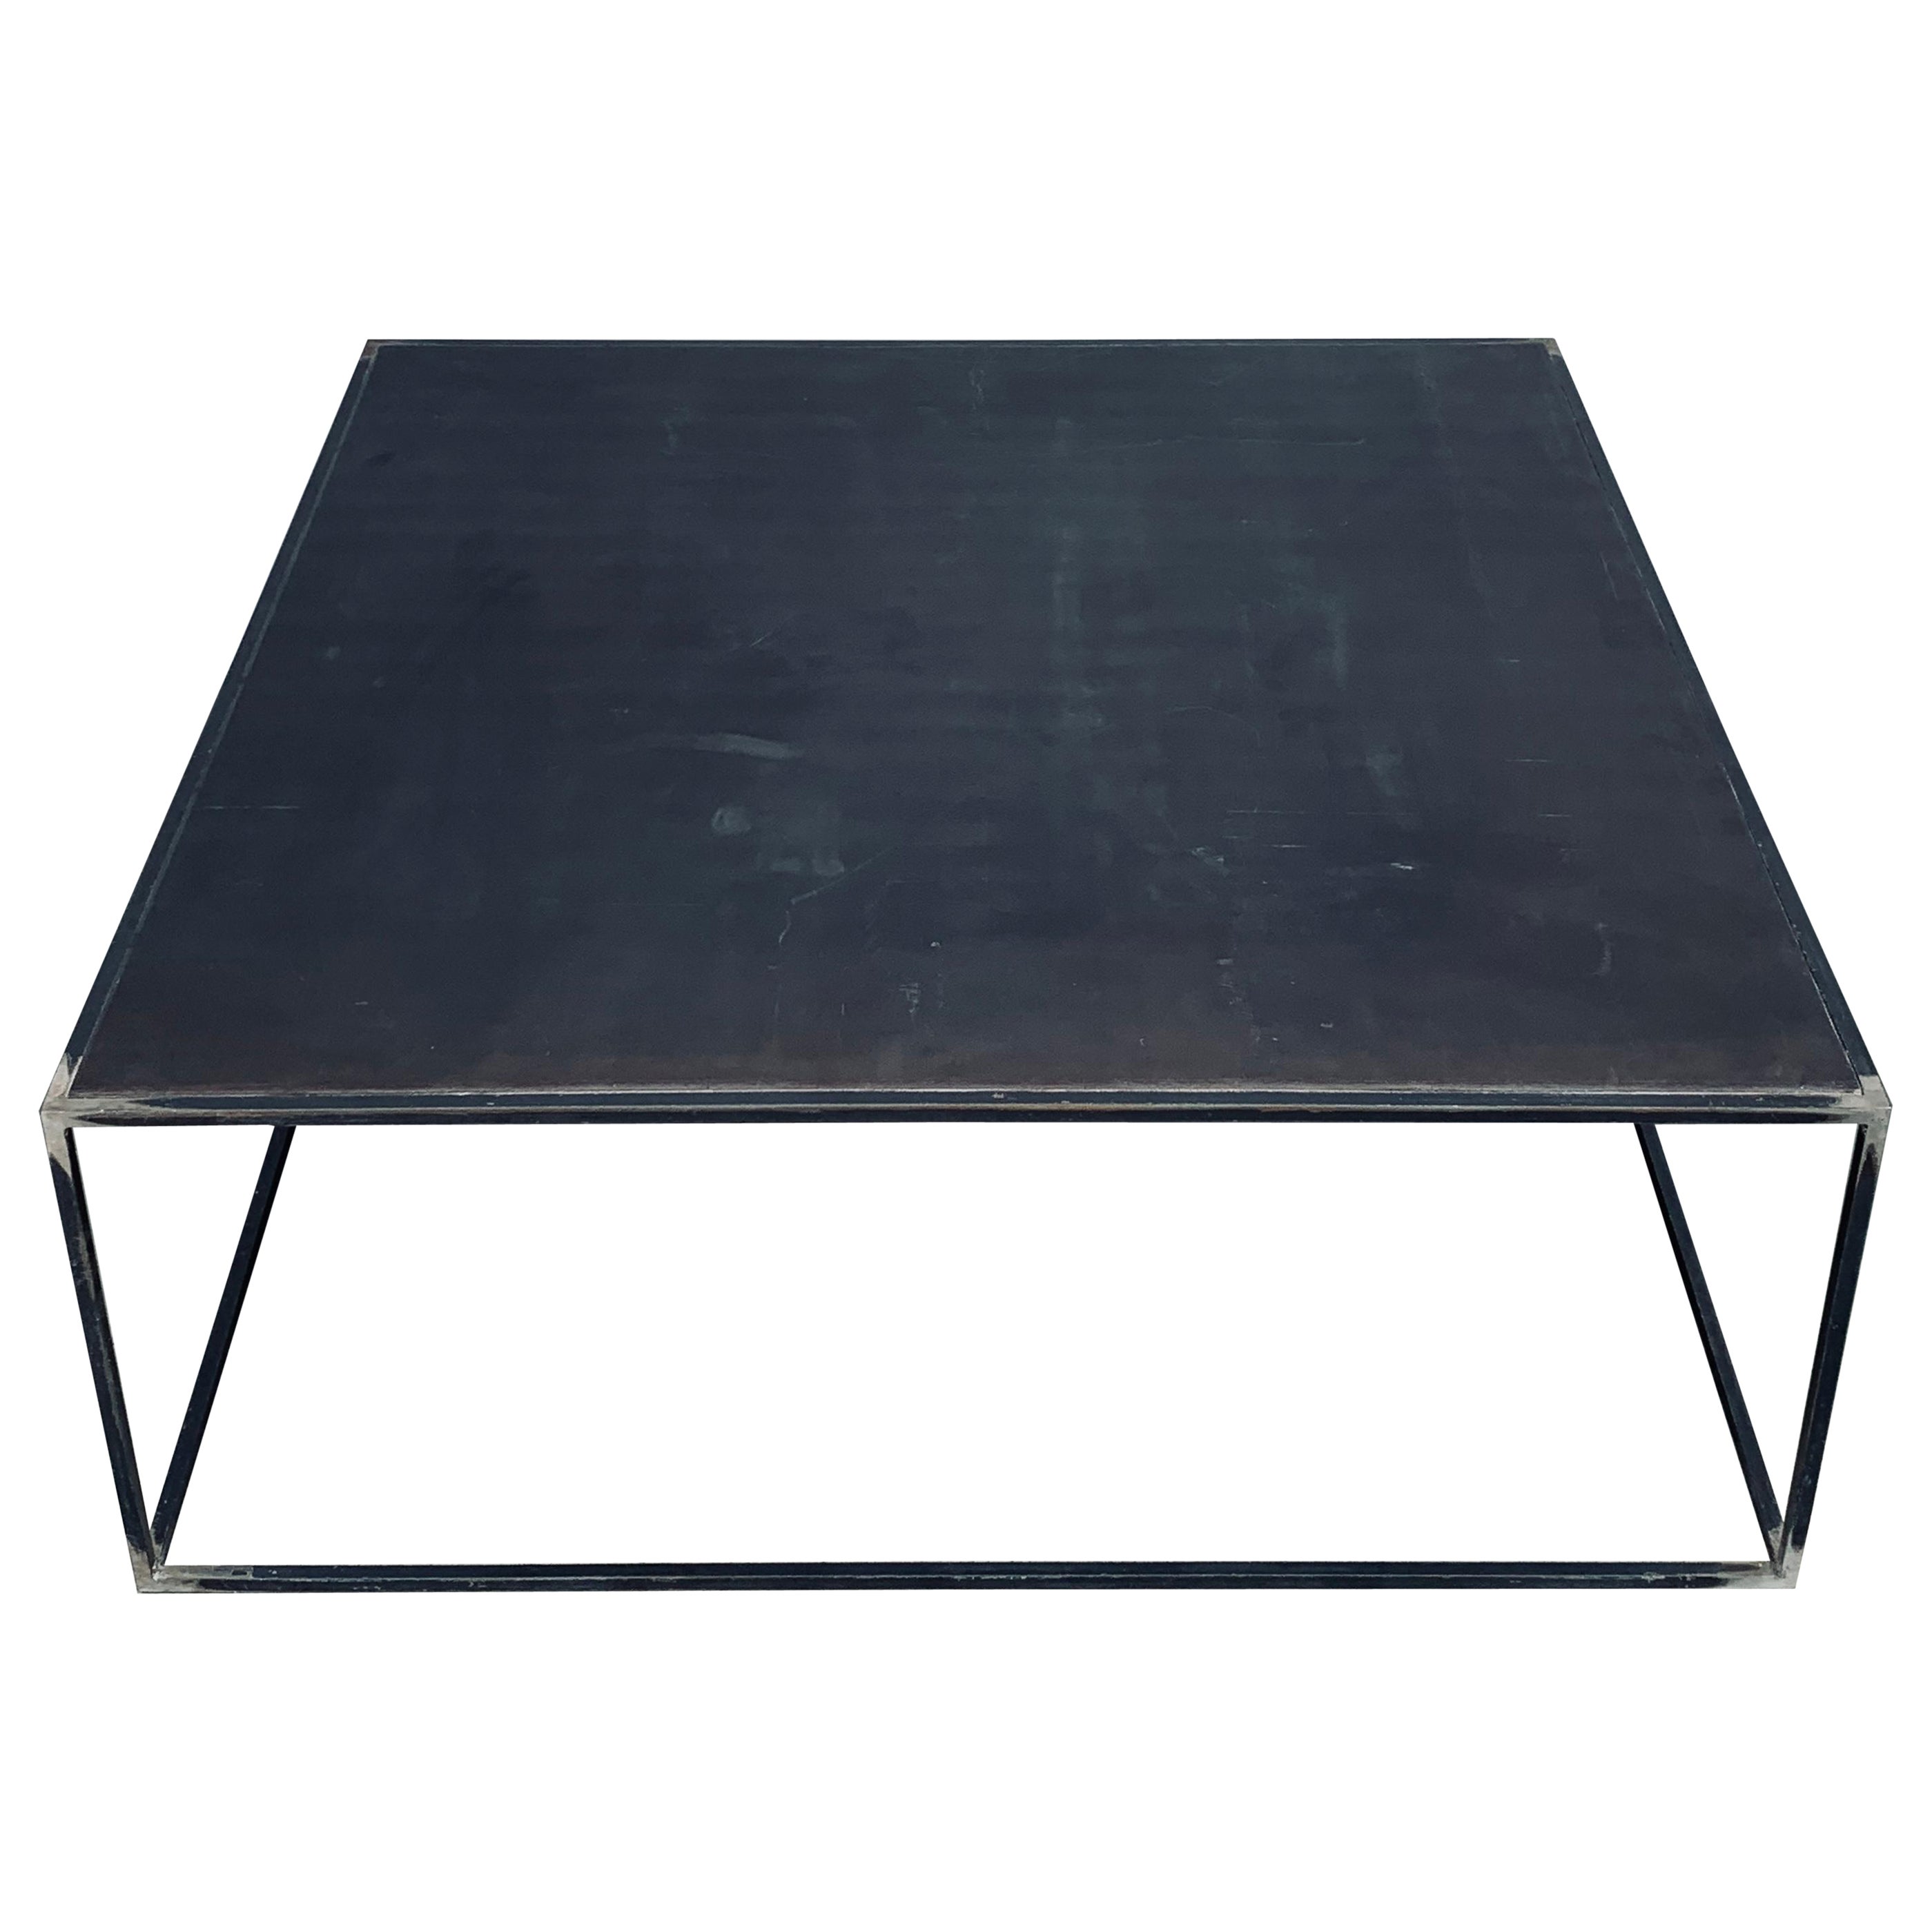 Minimalist 'Filiforme' Patinated Steel Coffee Table by Design Frères For Sale